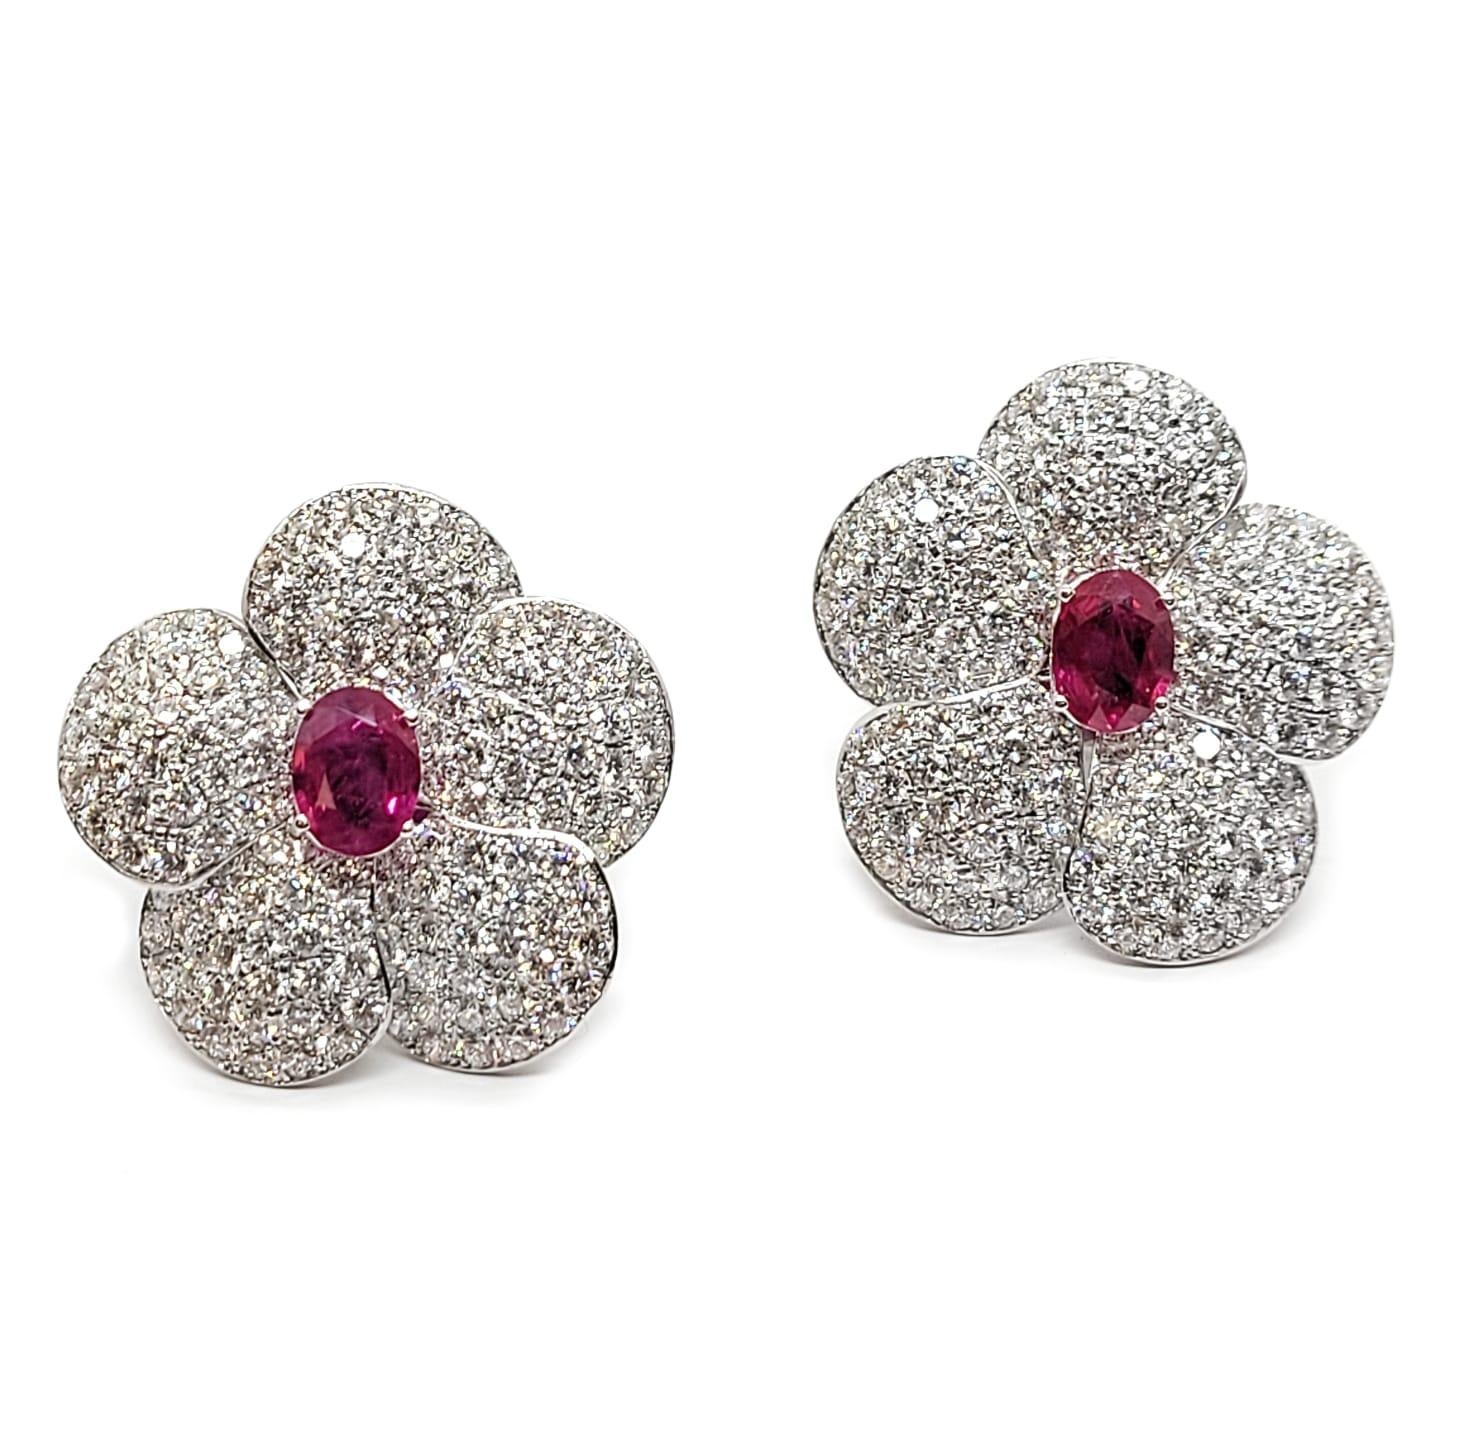 Andreoli 2.32 Carat Ruby Diamond 18K White Gold Flower Earrings CDC Certified

These earrings feature:
- 9.22 Carat Diamond
- 2.32 Carat Ruby Burma Certified
- 17.56 Gram 18K White Gold
- Made In Italy